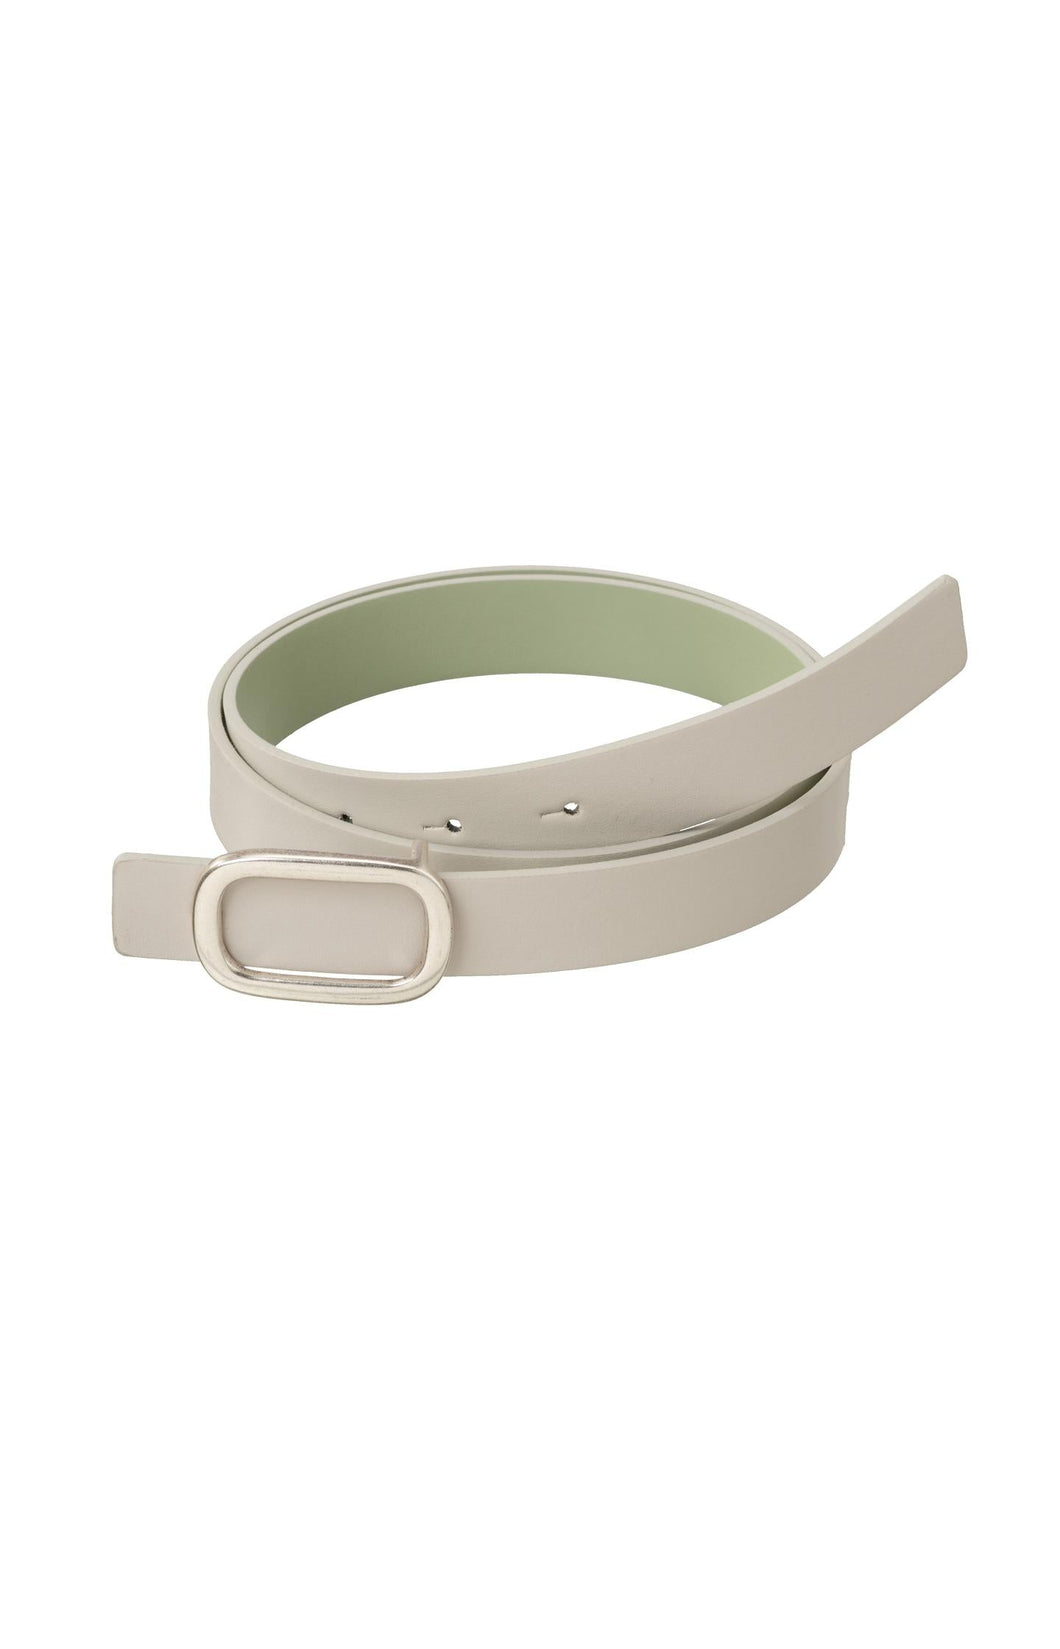 Reversible belt with square buckle and colored side - Agate Grey - Type: product